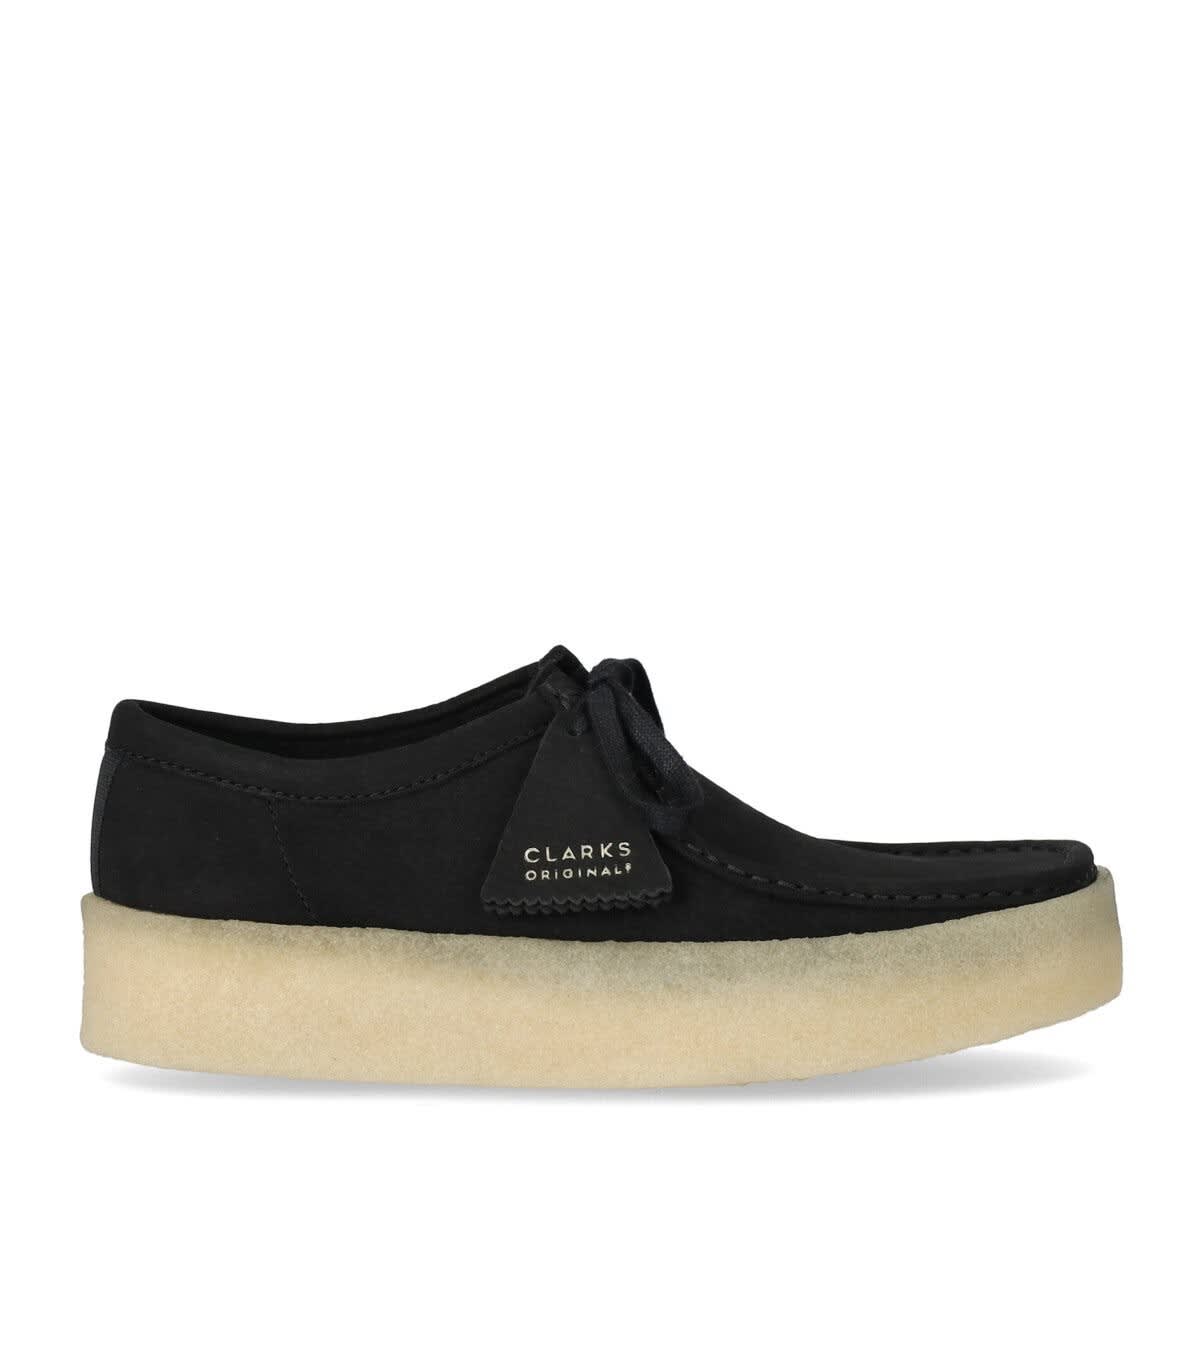 CLARKS WALLABEE CUP LACE UP SHOES IN BLACK NUBUCK